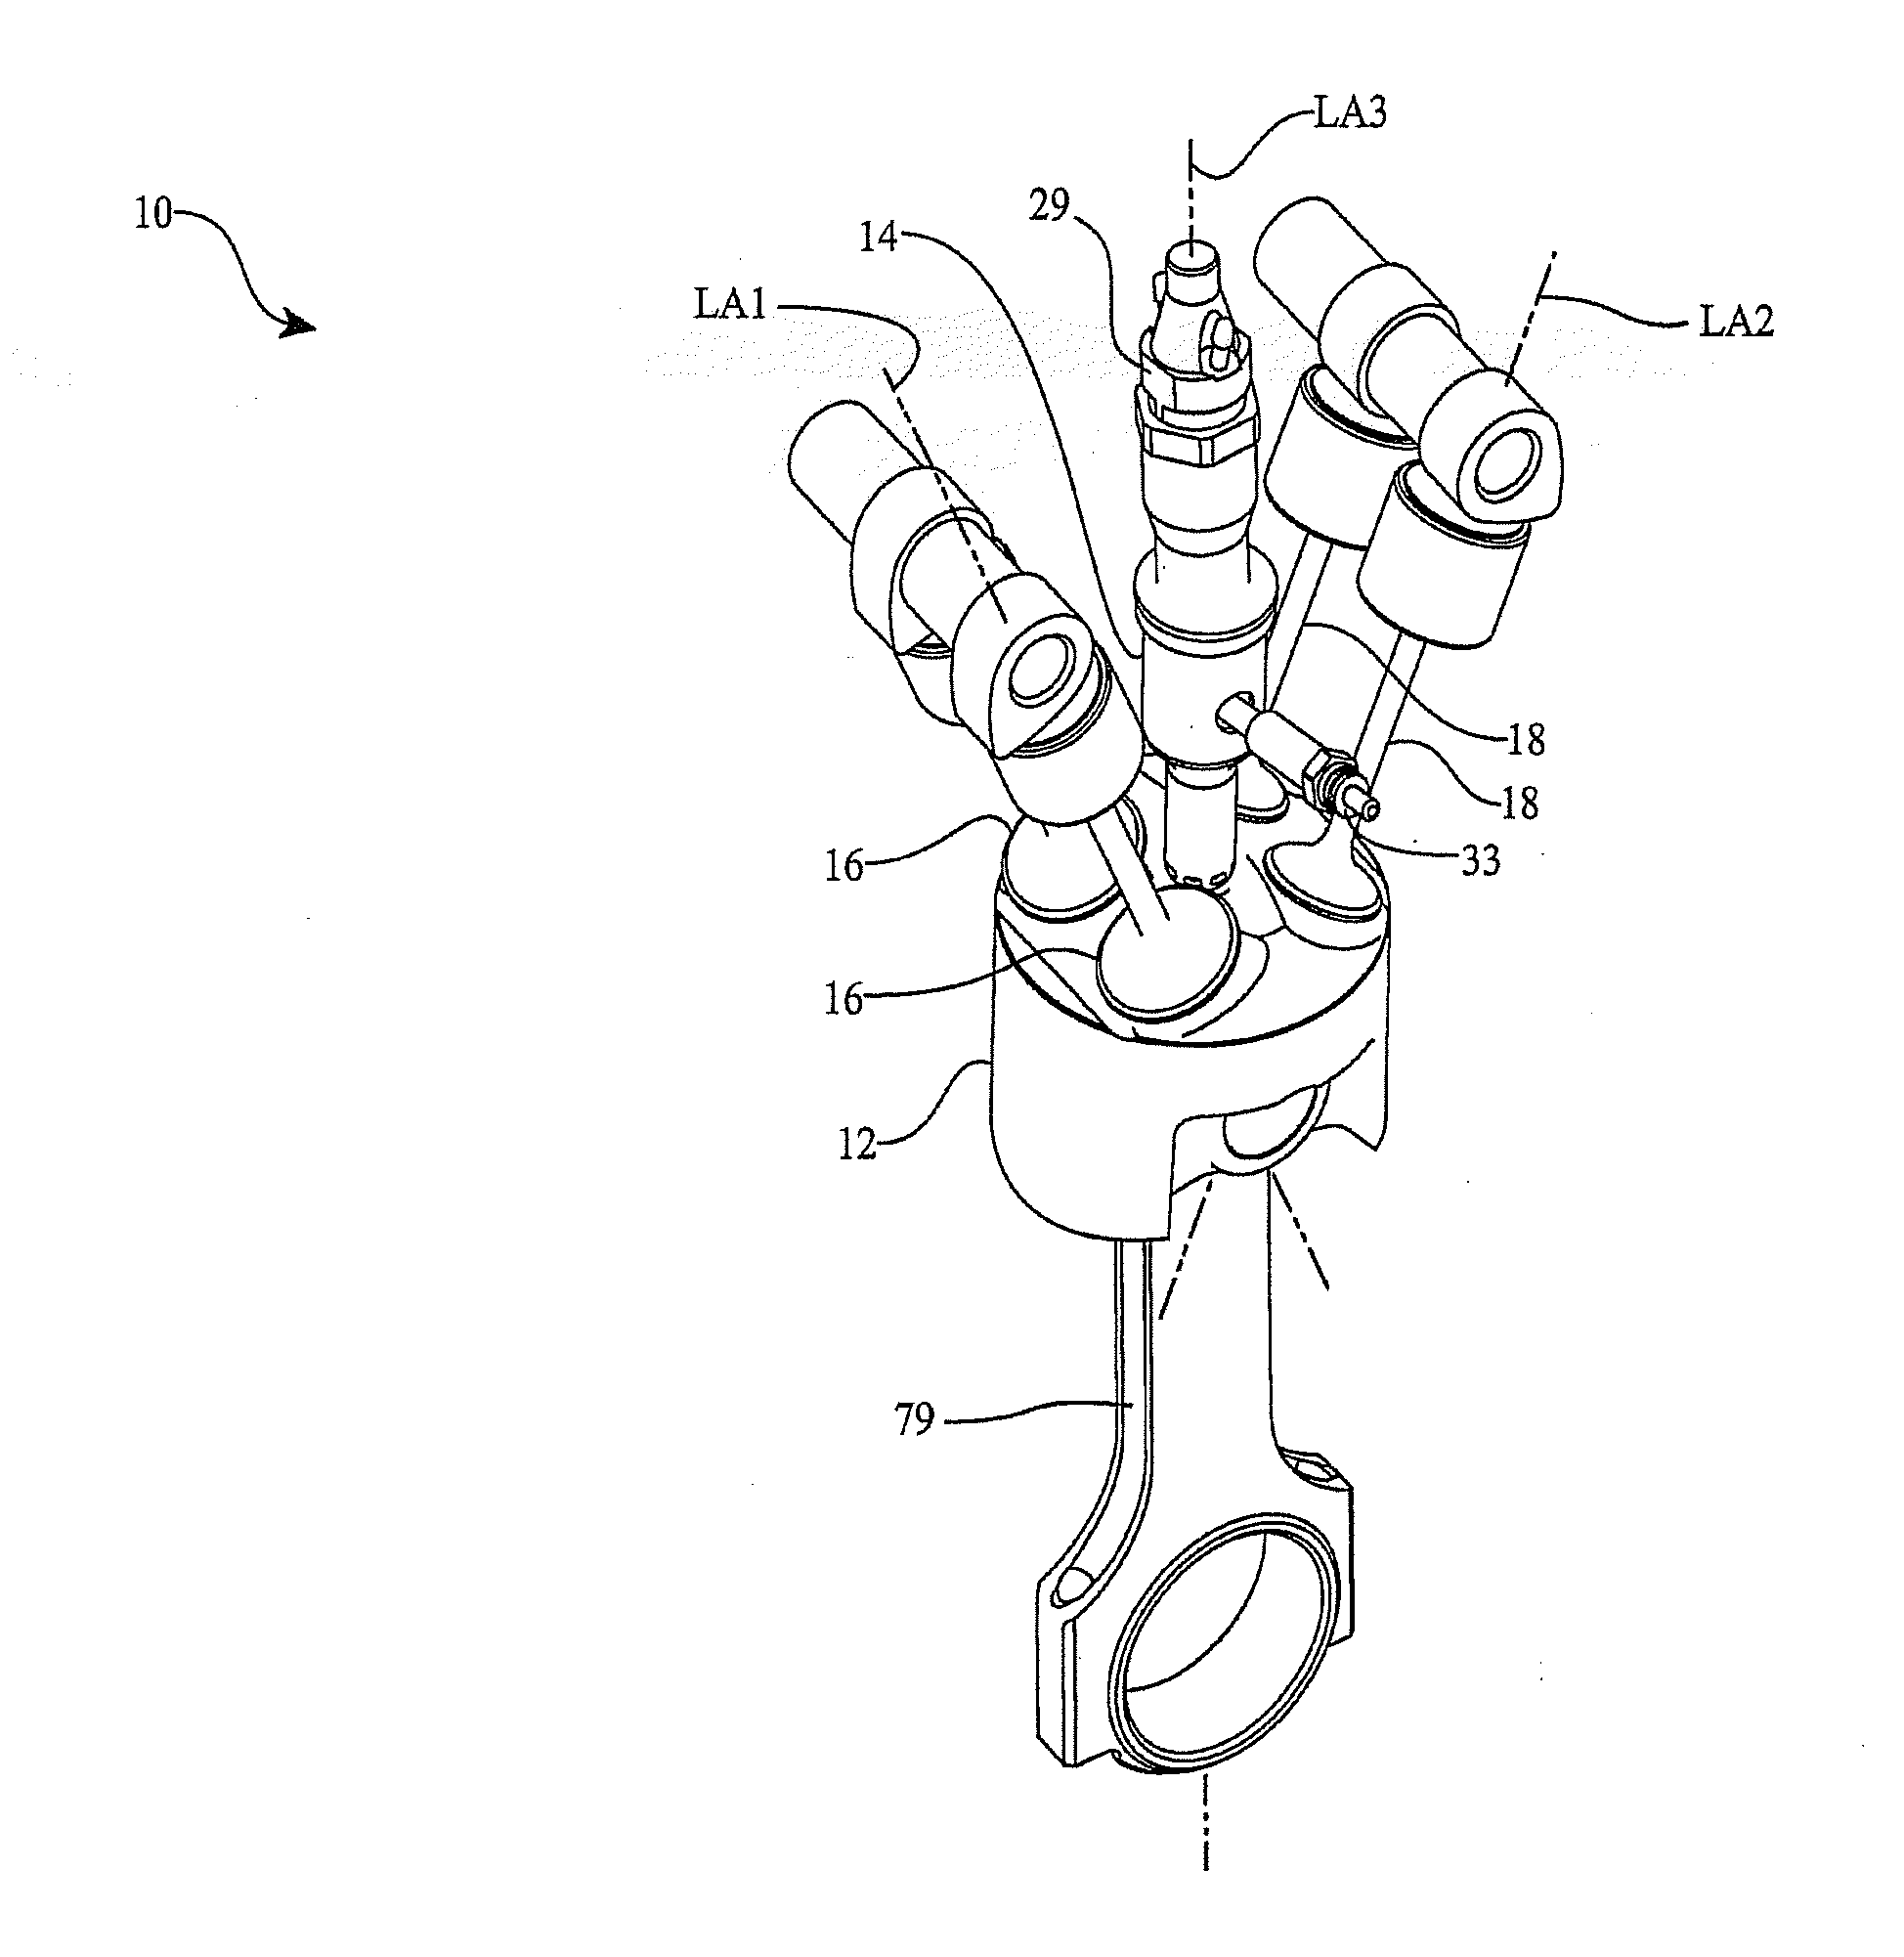 High efficiency compression ignition, indirect injected diesel engines and methods thereof